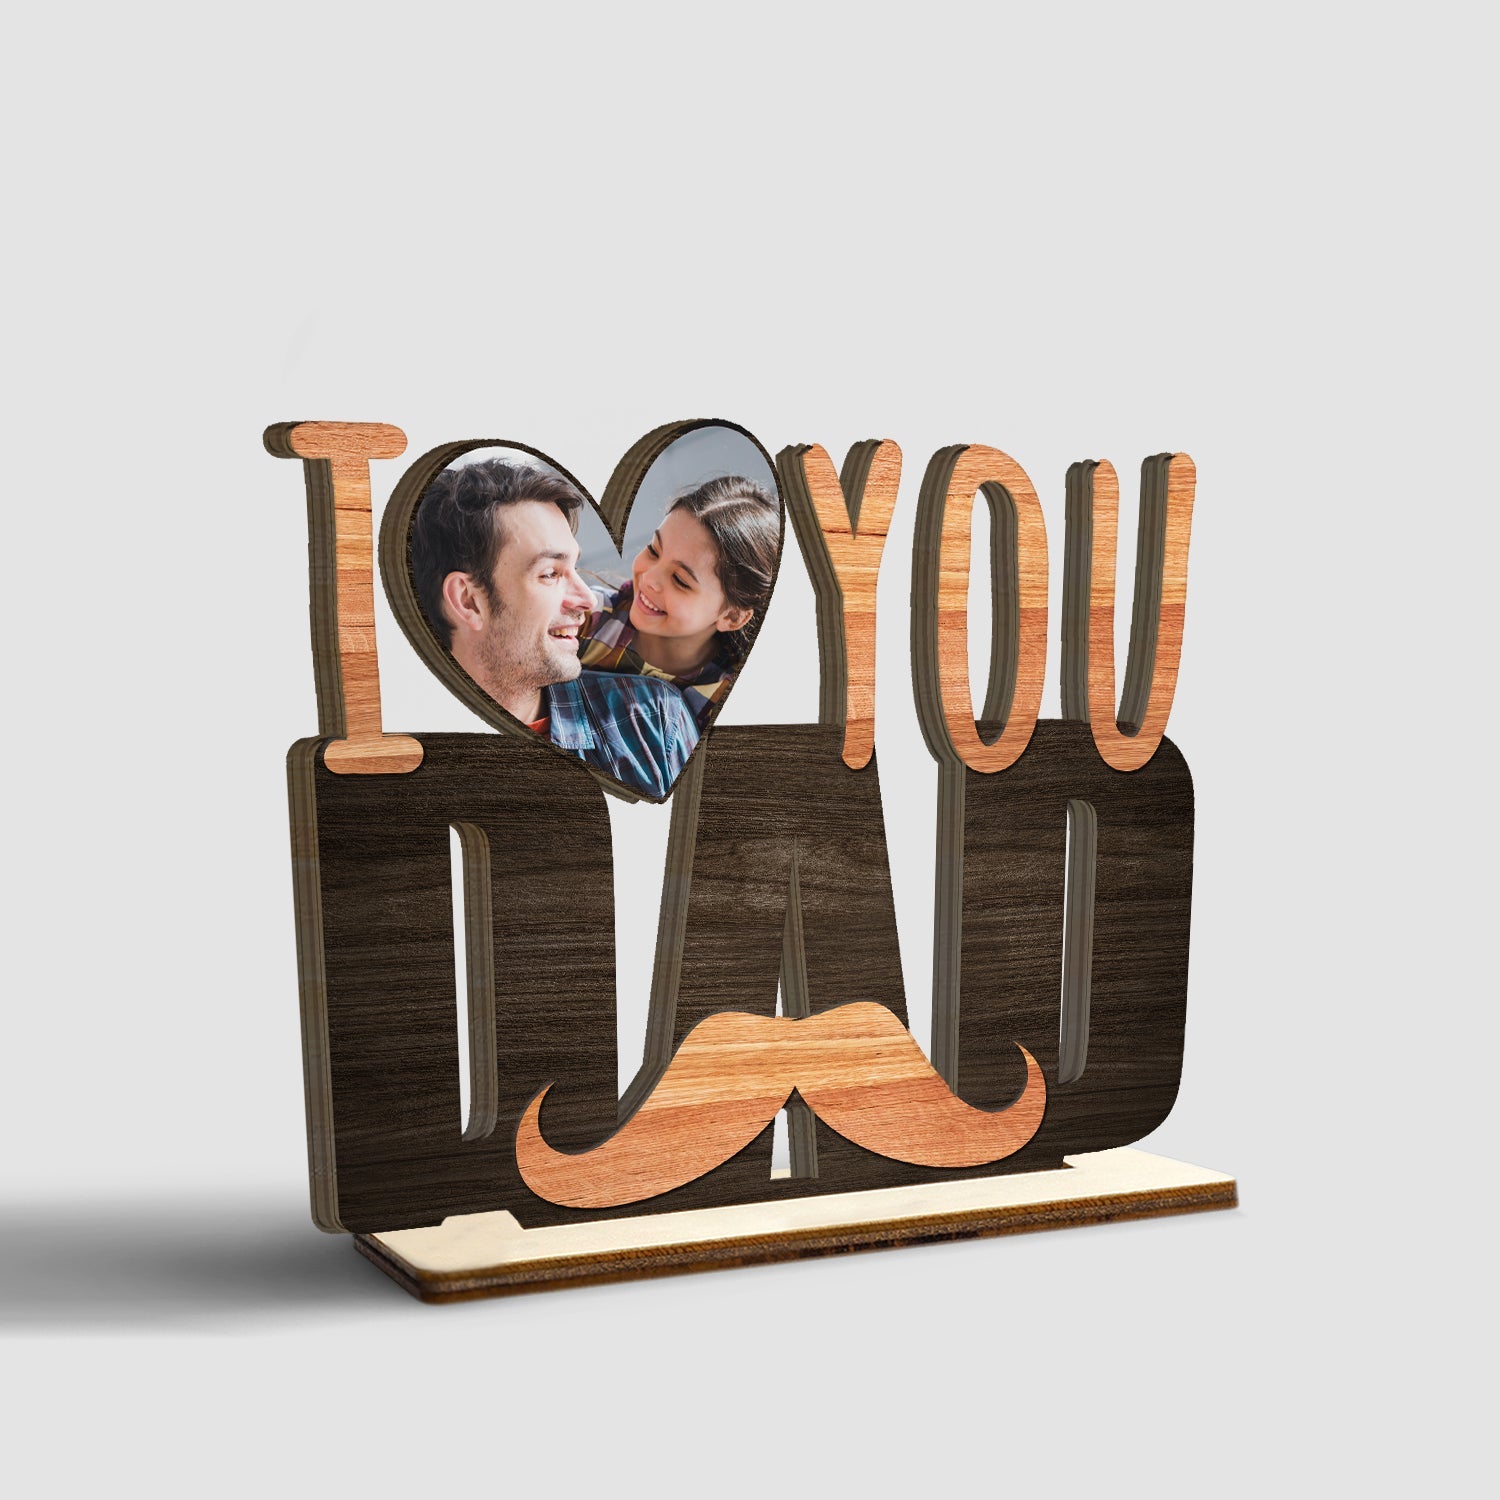 I Love You Dad, Custom Photo, Wooden Plaque 3 Layers